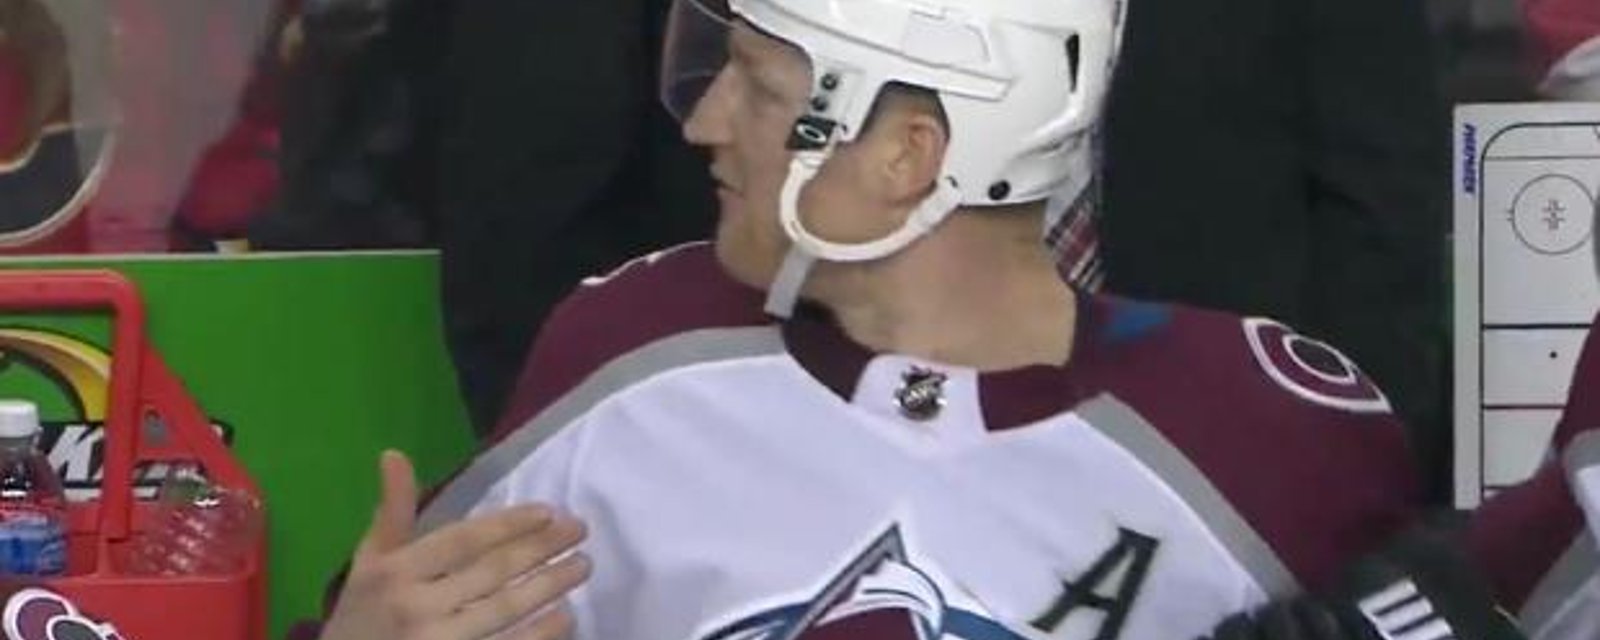 Things boil over In Colorado: MacKinnon blows a gasket at his own coach during loss to Flames!